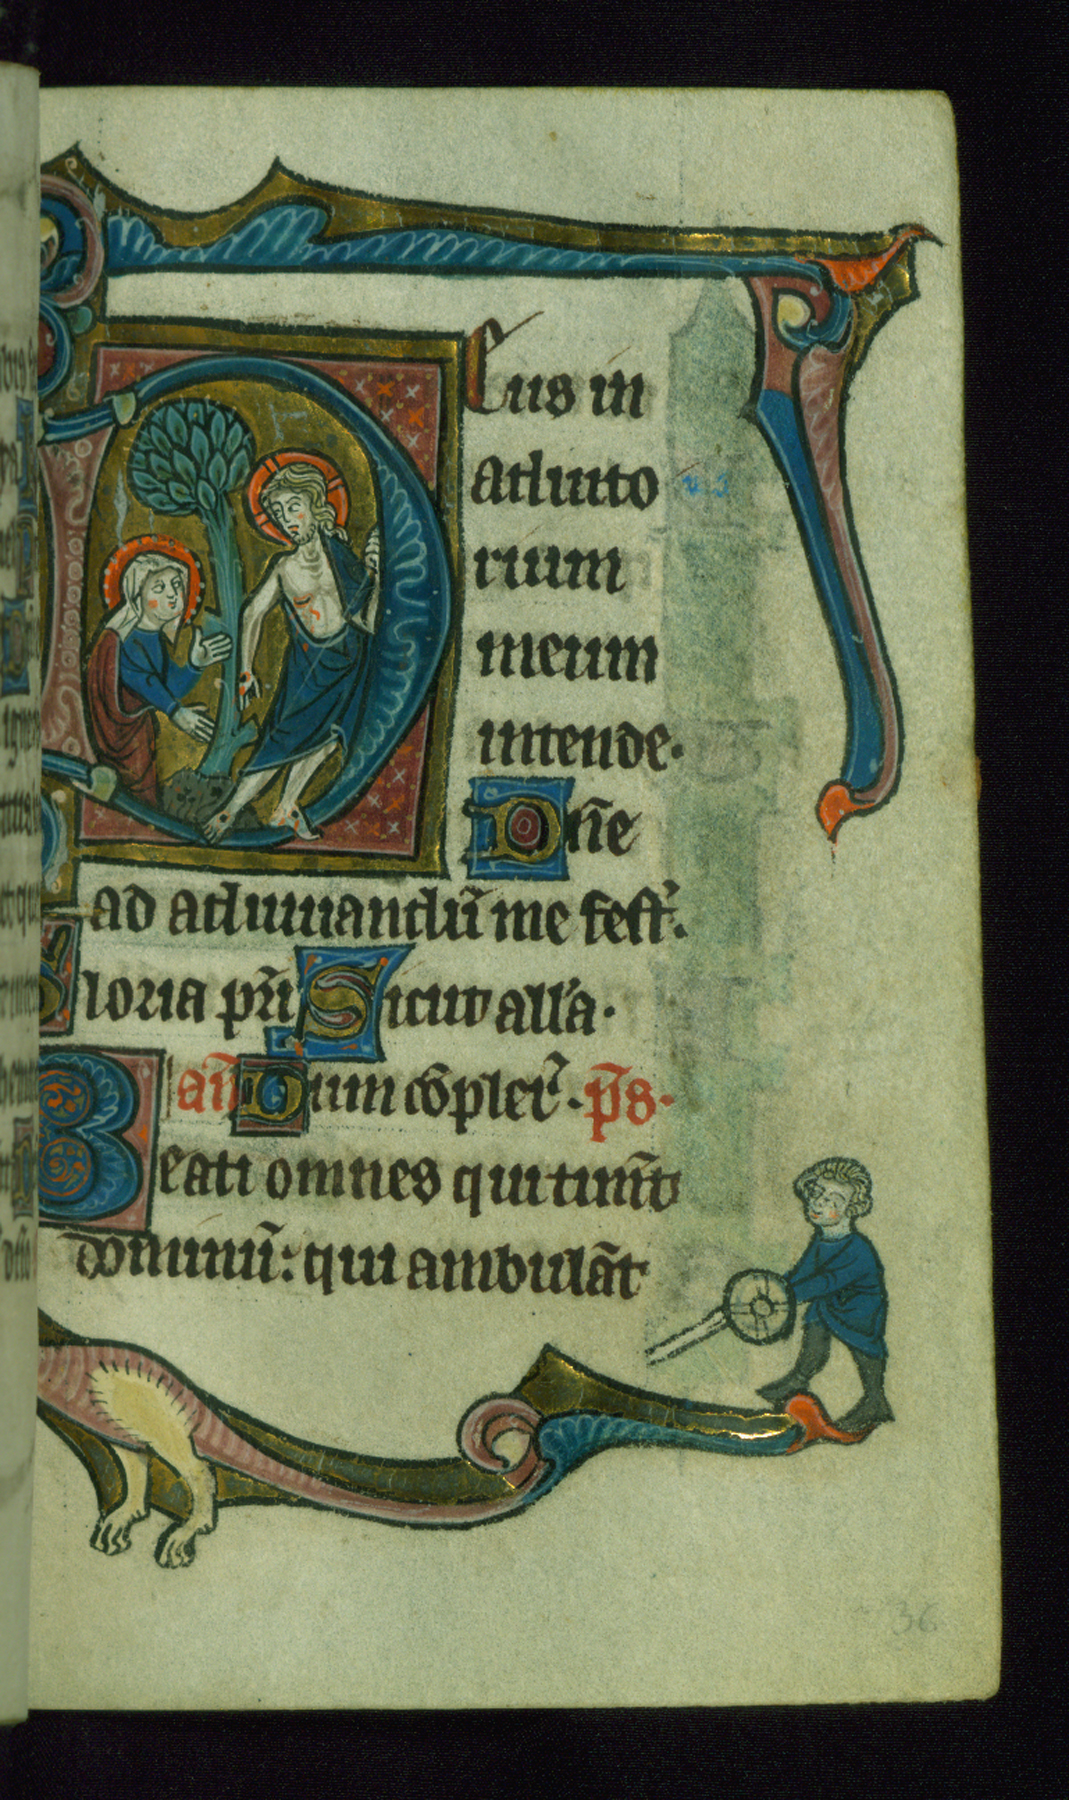 Image for Leaf from Book of Hours: Vespers, Initial "D" with Scene of "Noli me tangere" and Marginal Drollery of a Man with Sword and Shield and a Dragon